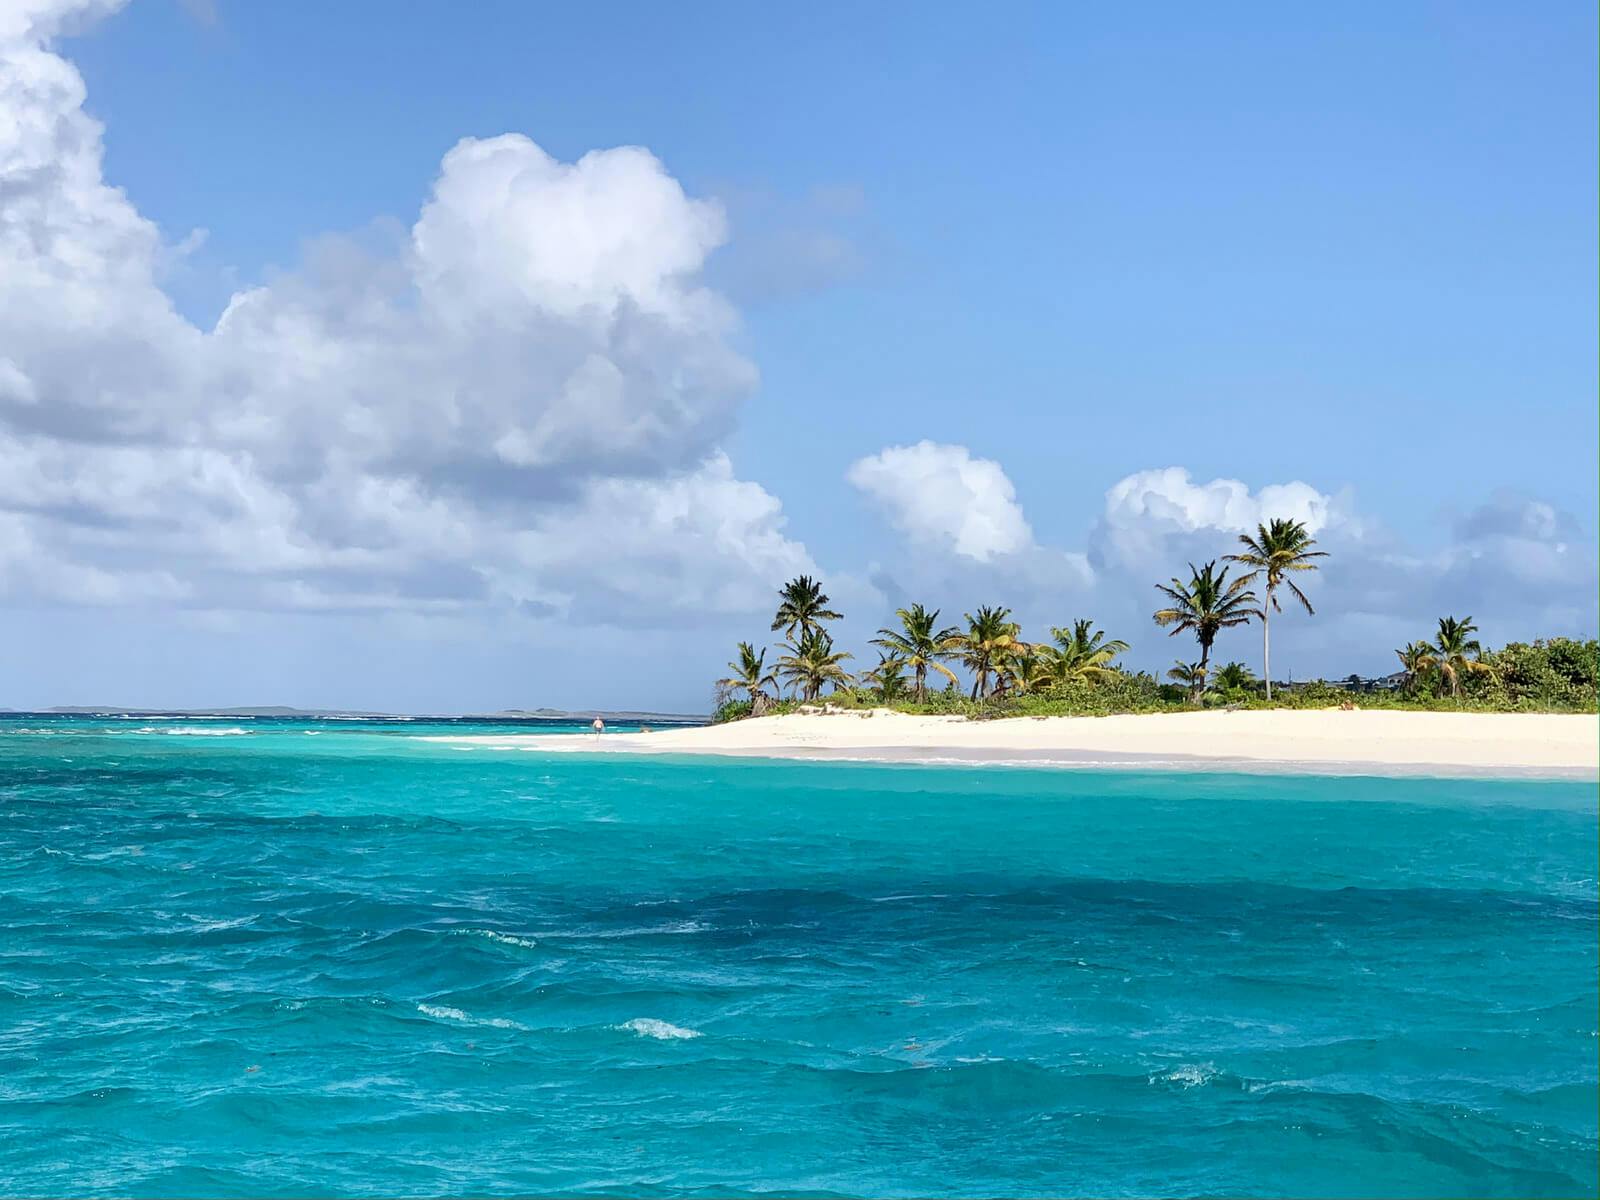 Anguilla island from the ocean, with a spit of white sand topped with palm trees